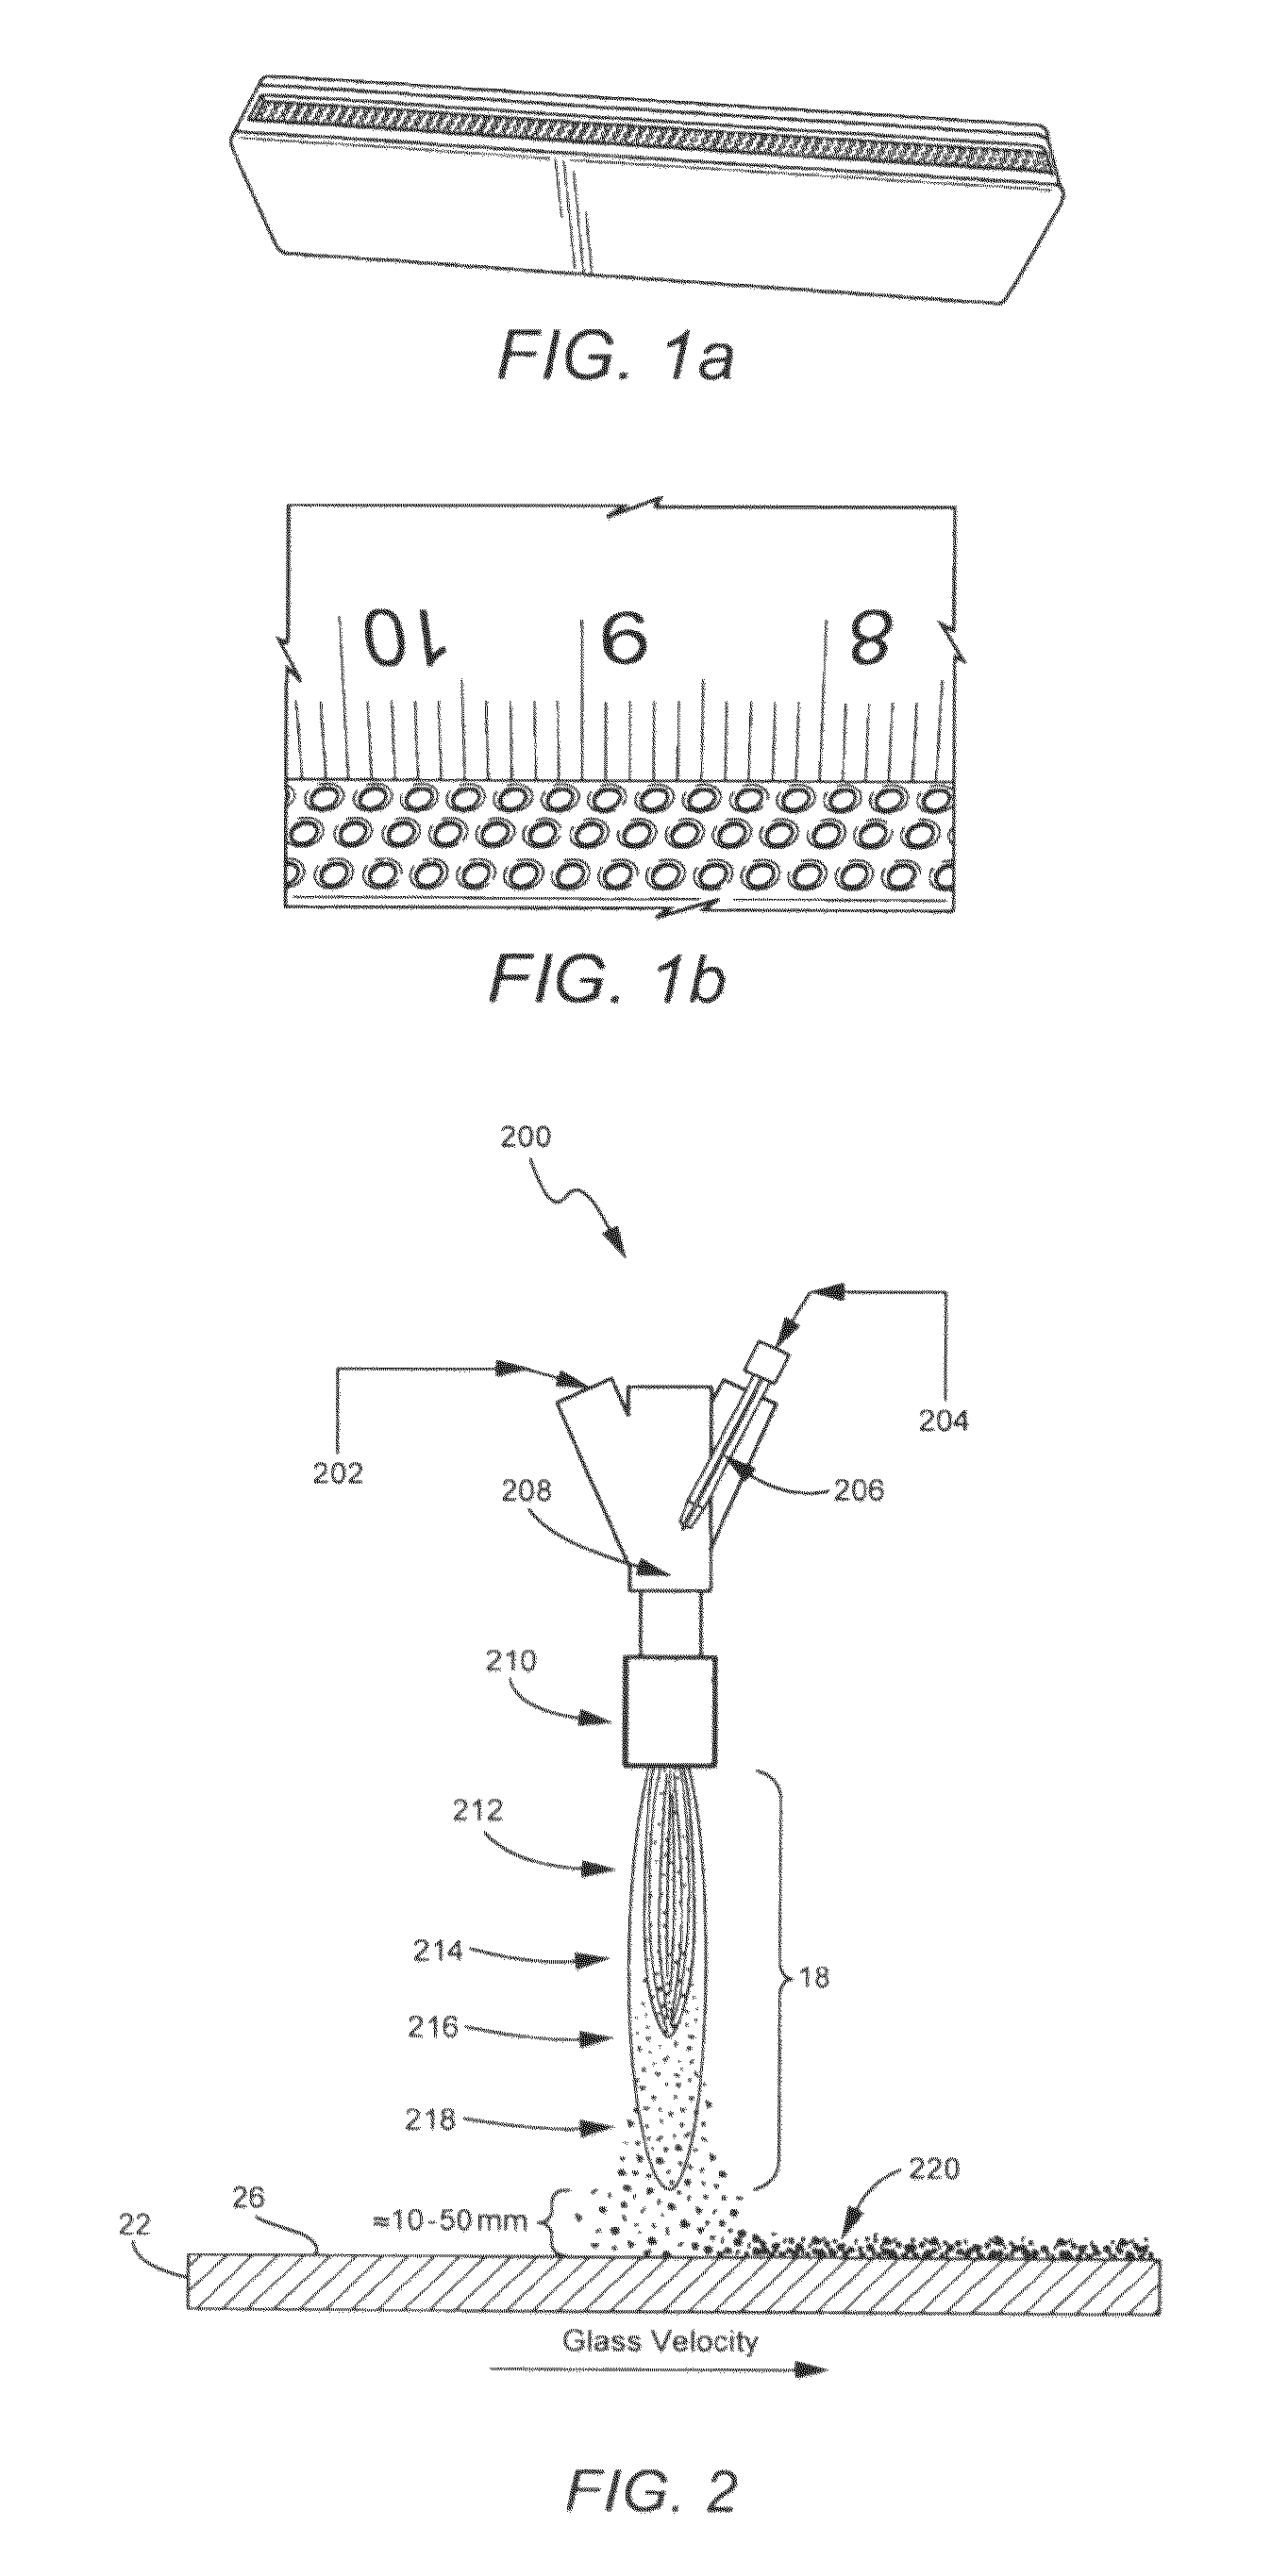 Remote combustion deposition burner and/or related methods